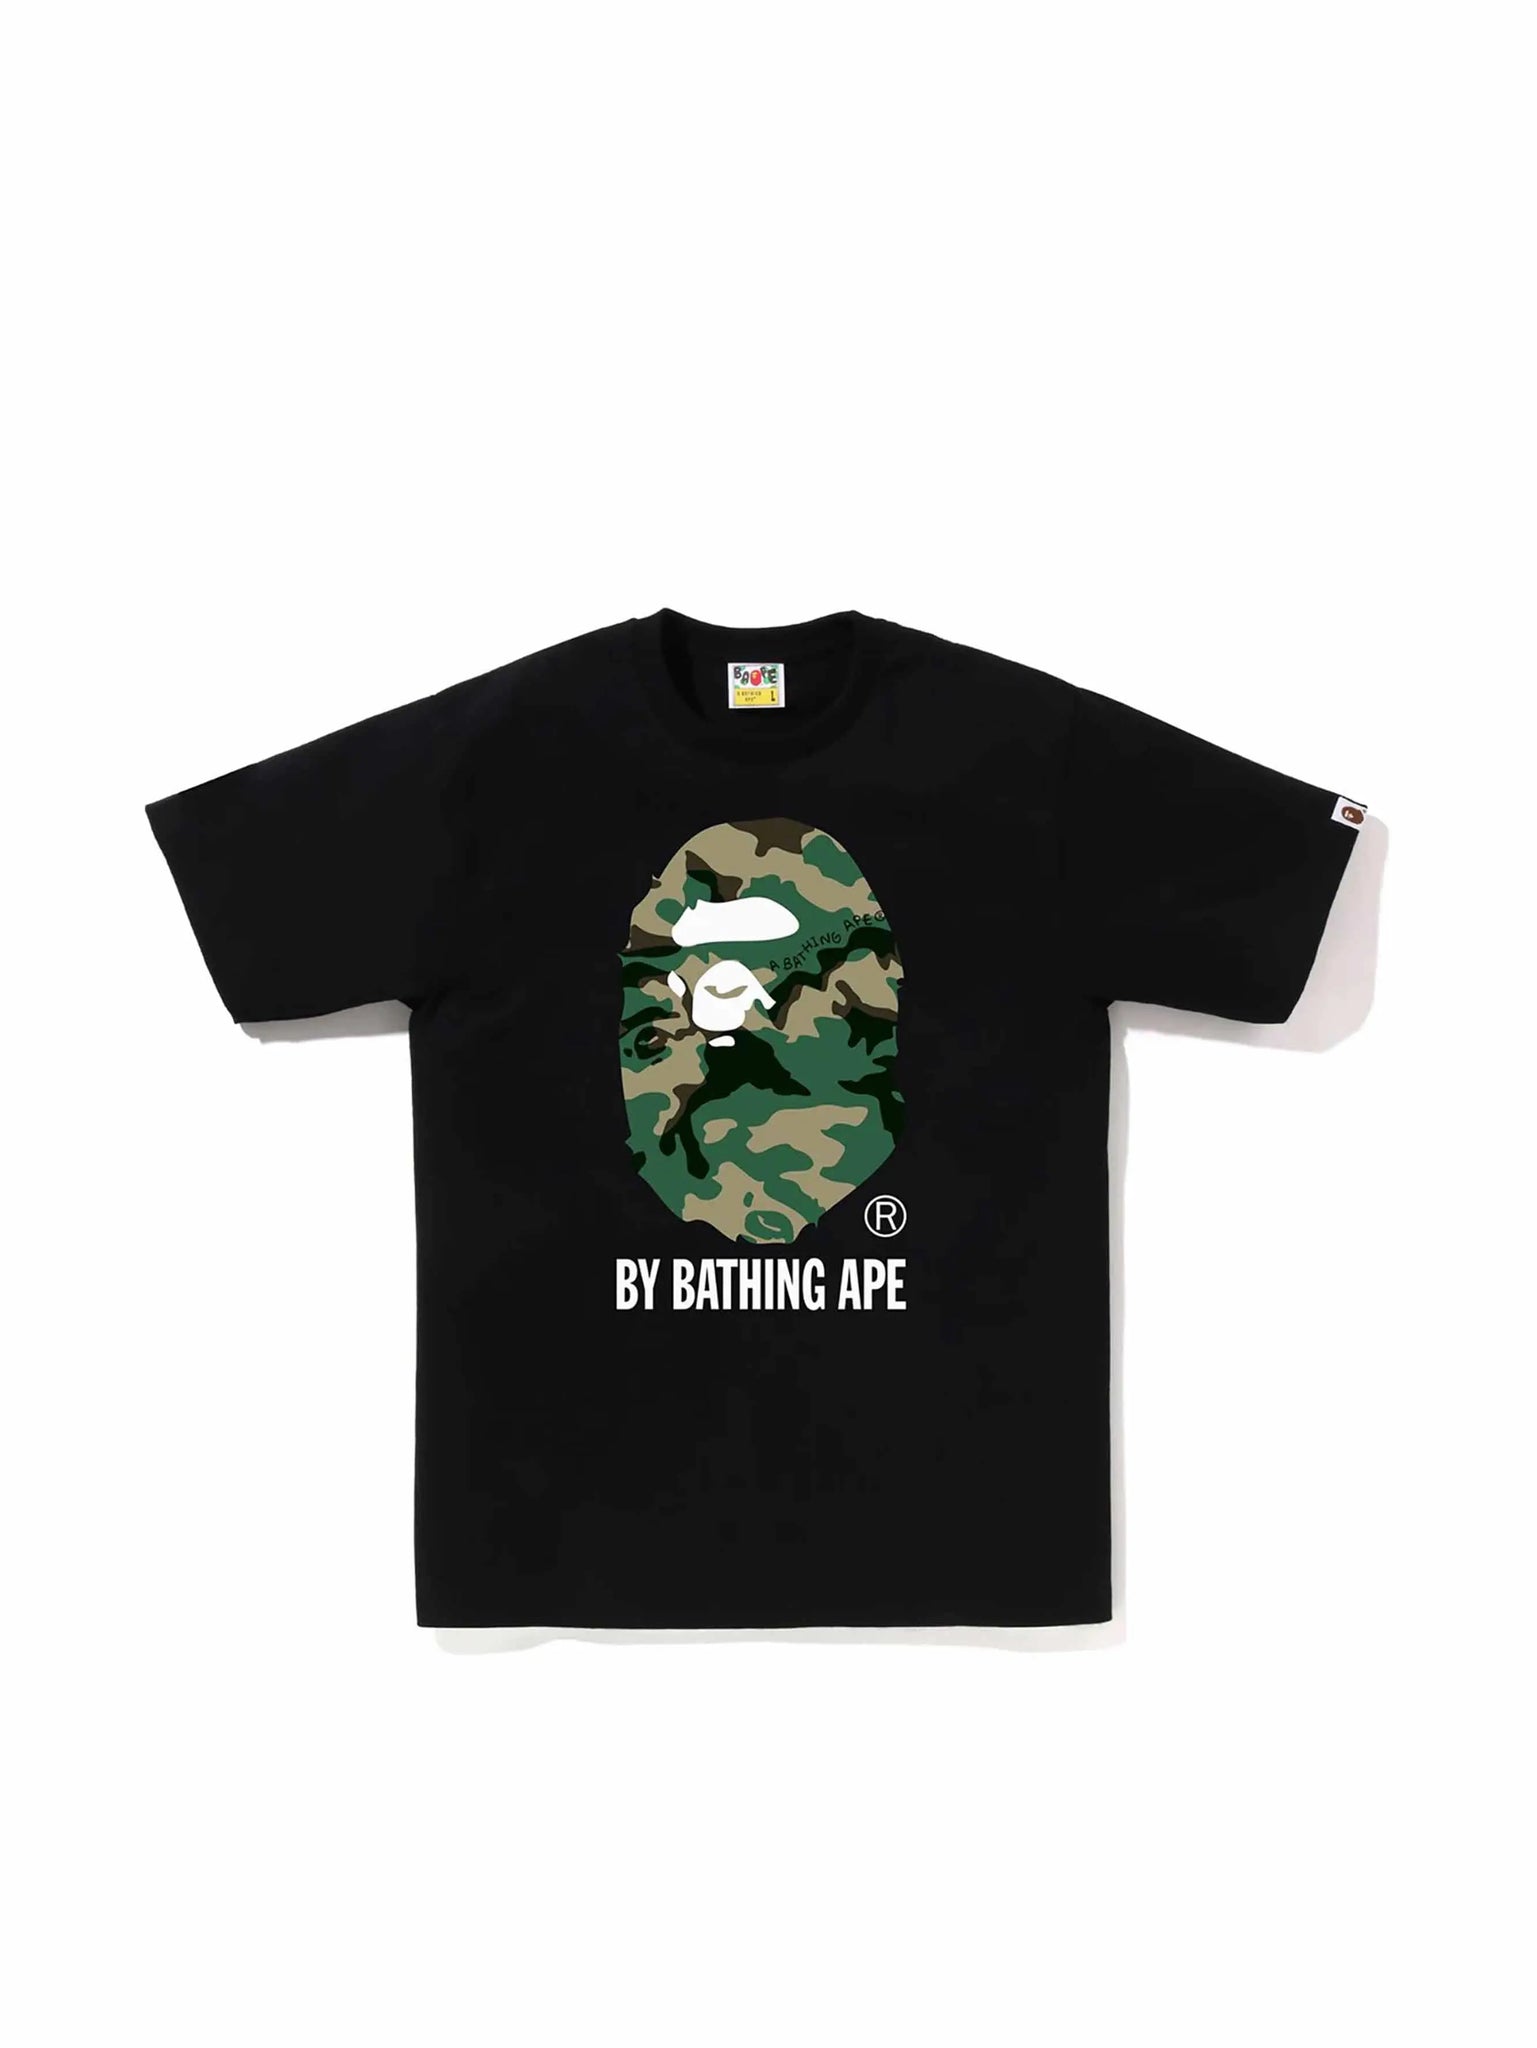 A Bathing Ape Woodland Camo By Bathing Ape Tee Black in Auckland, New Zealand - Shop name